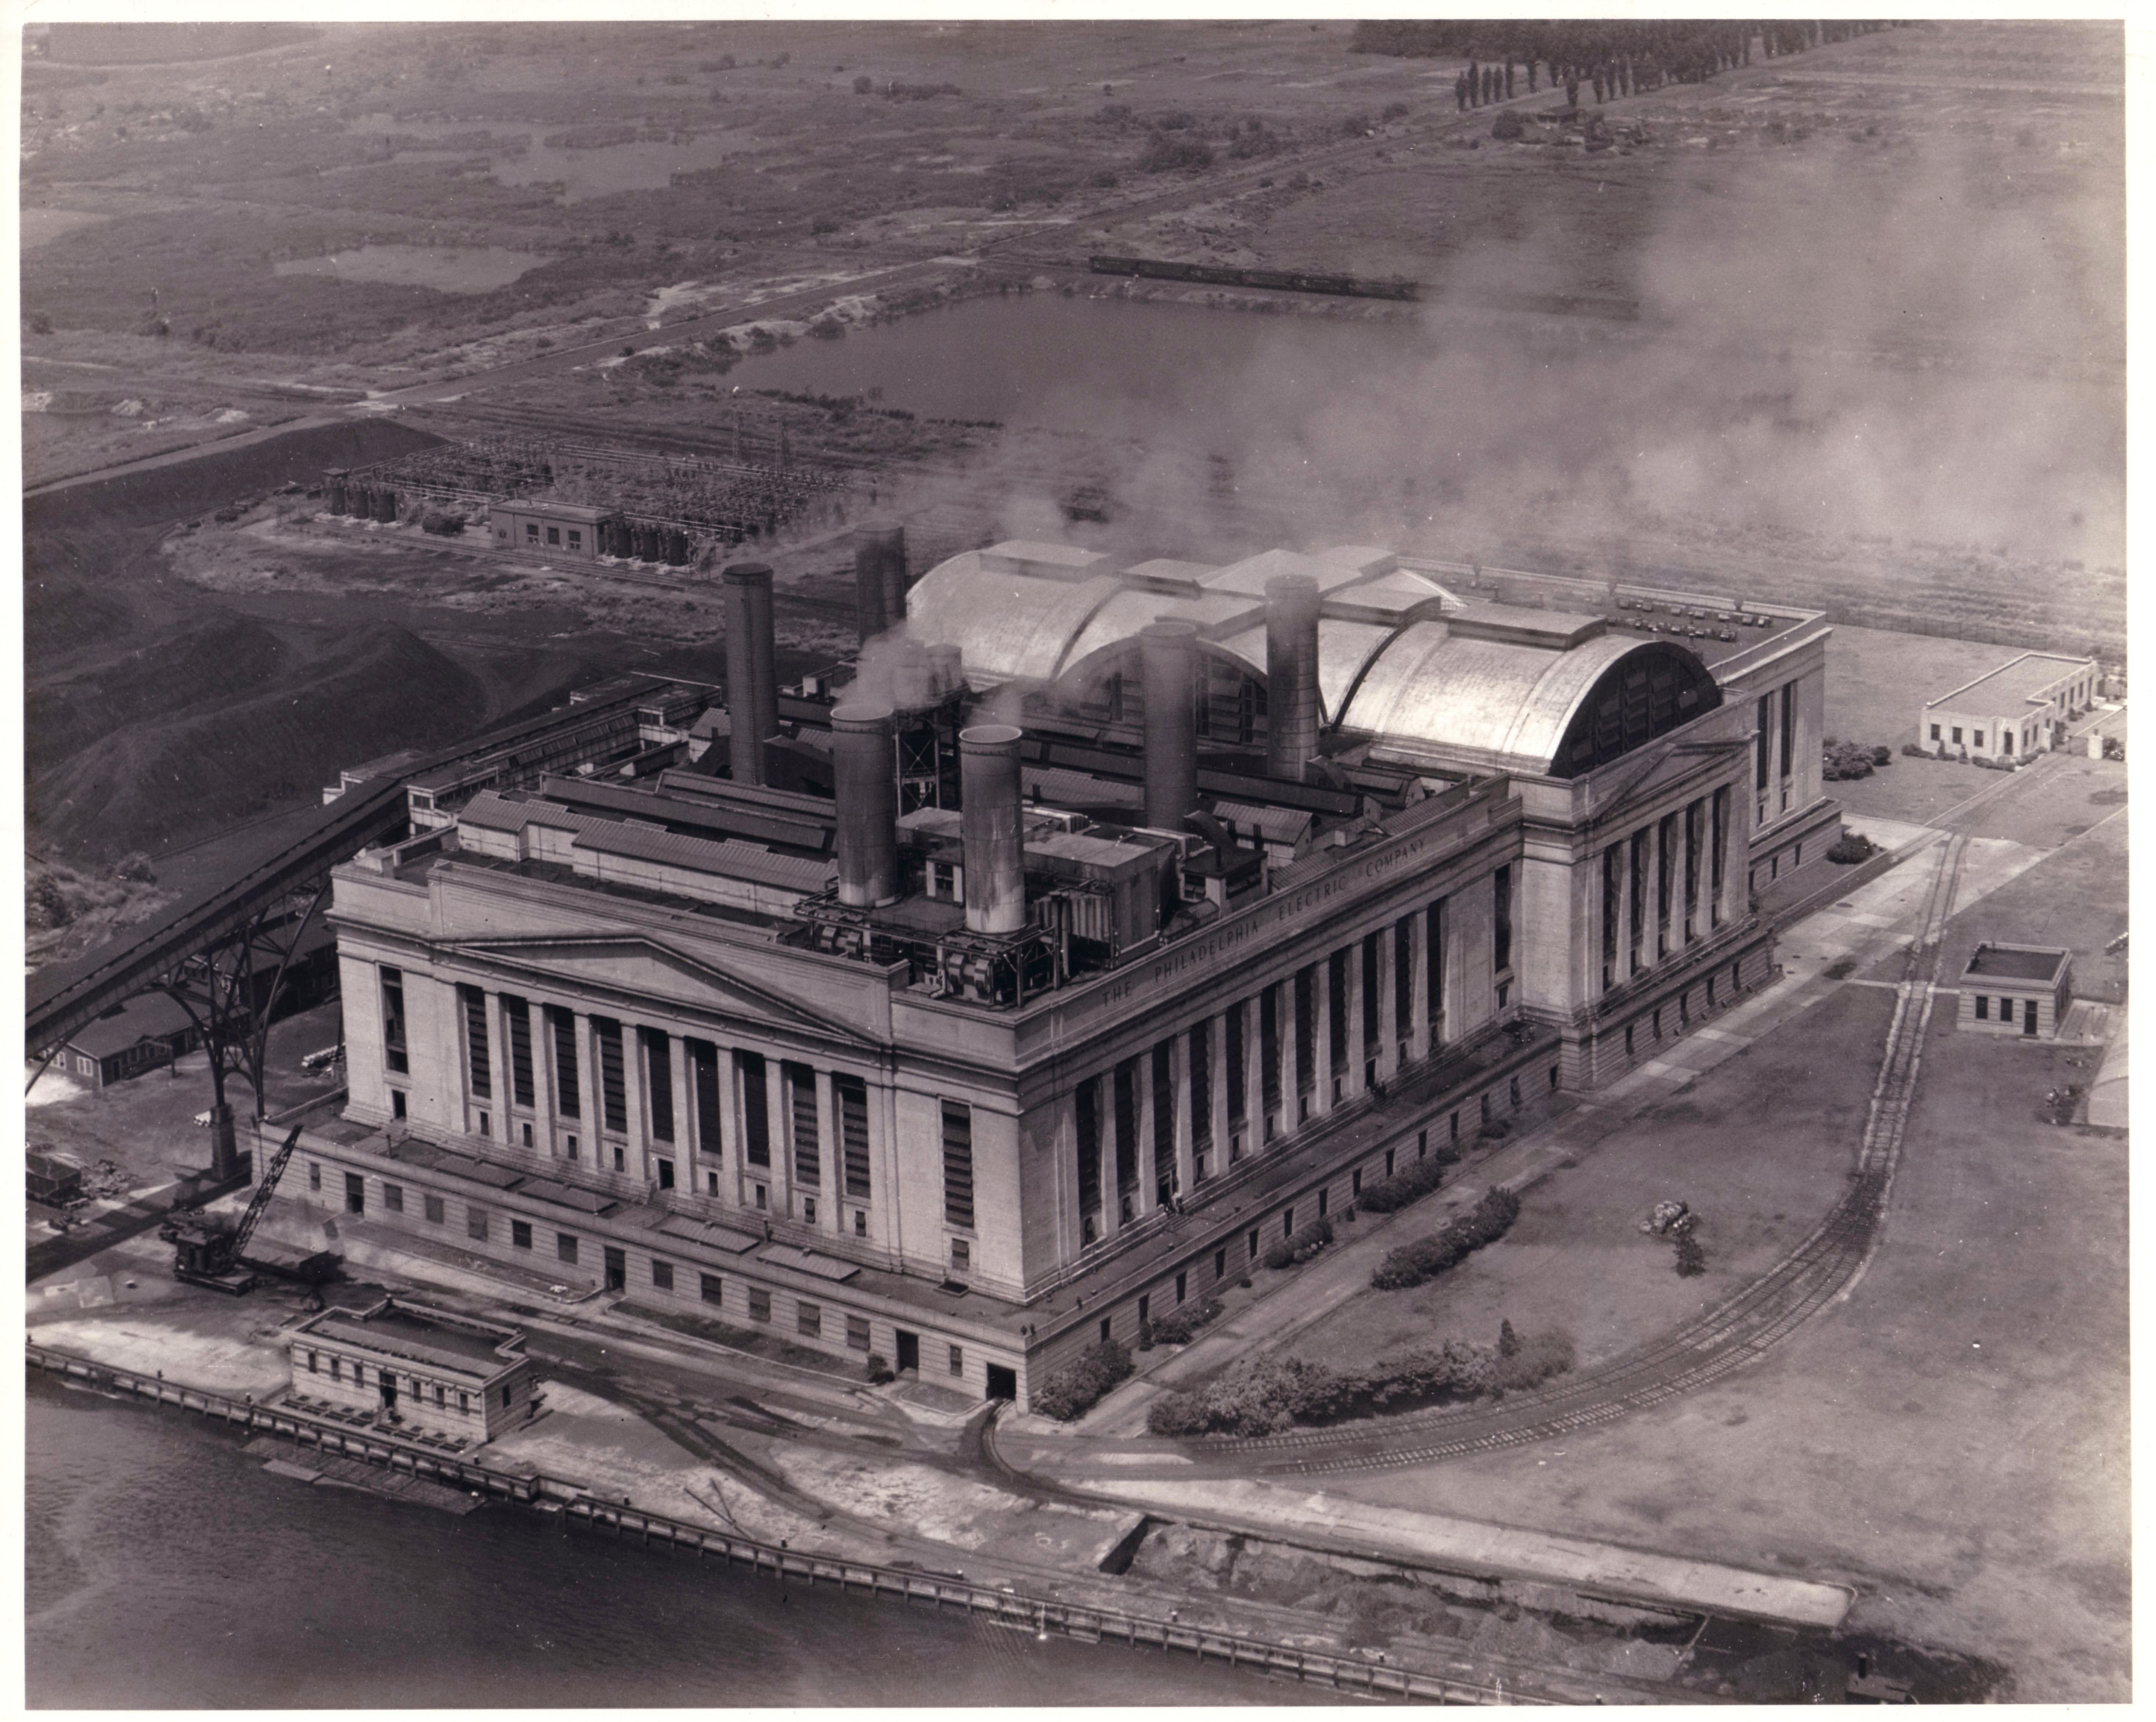 Black and white aerial photograph of a large electric plant located along a river.